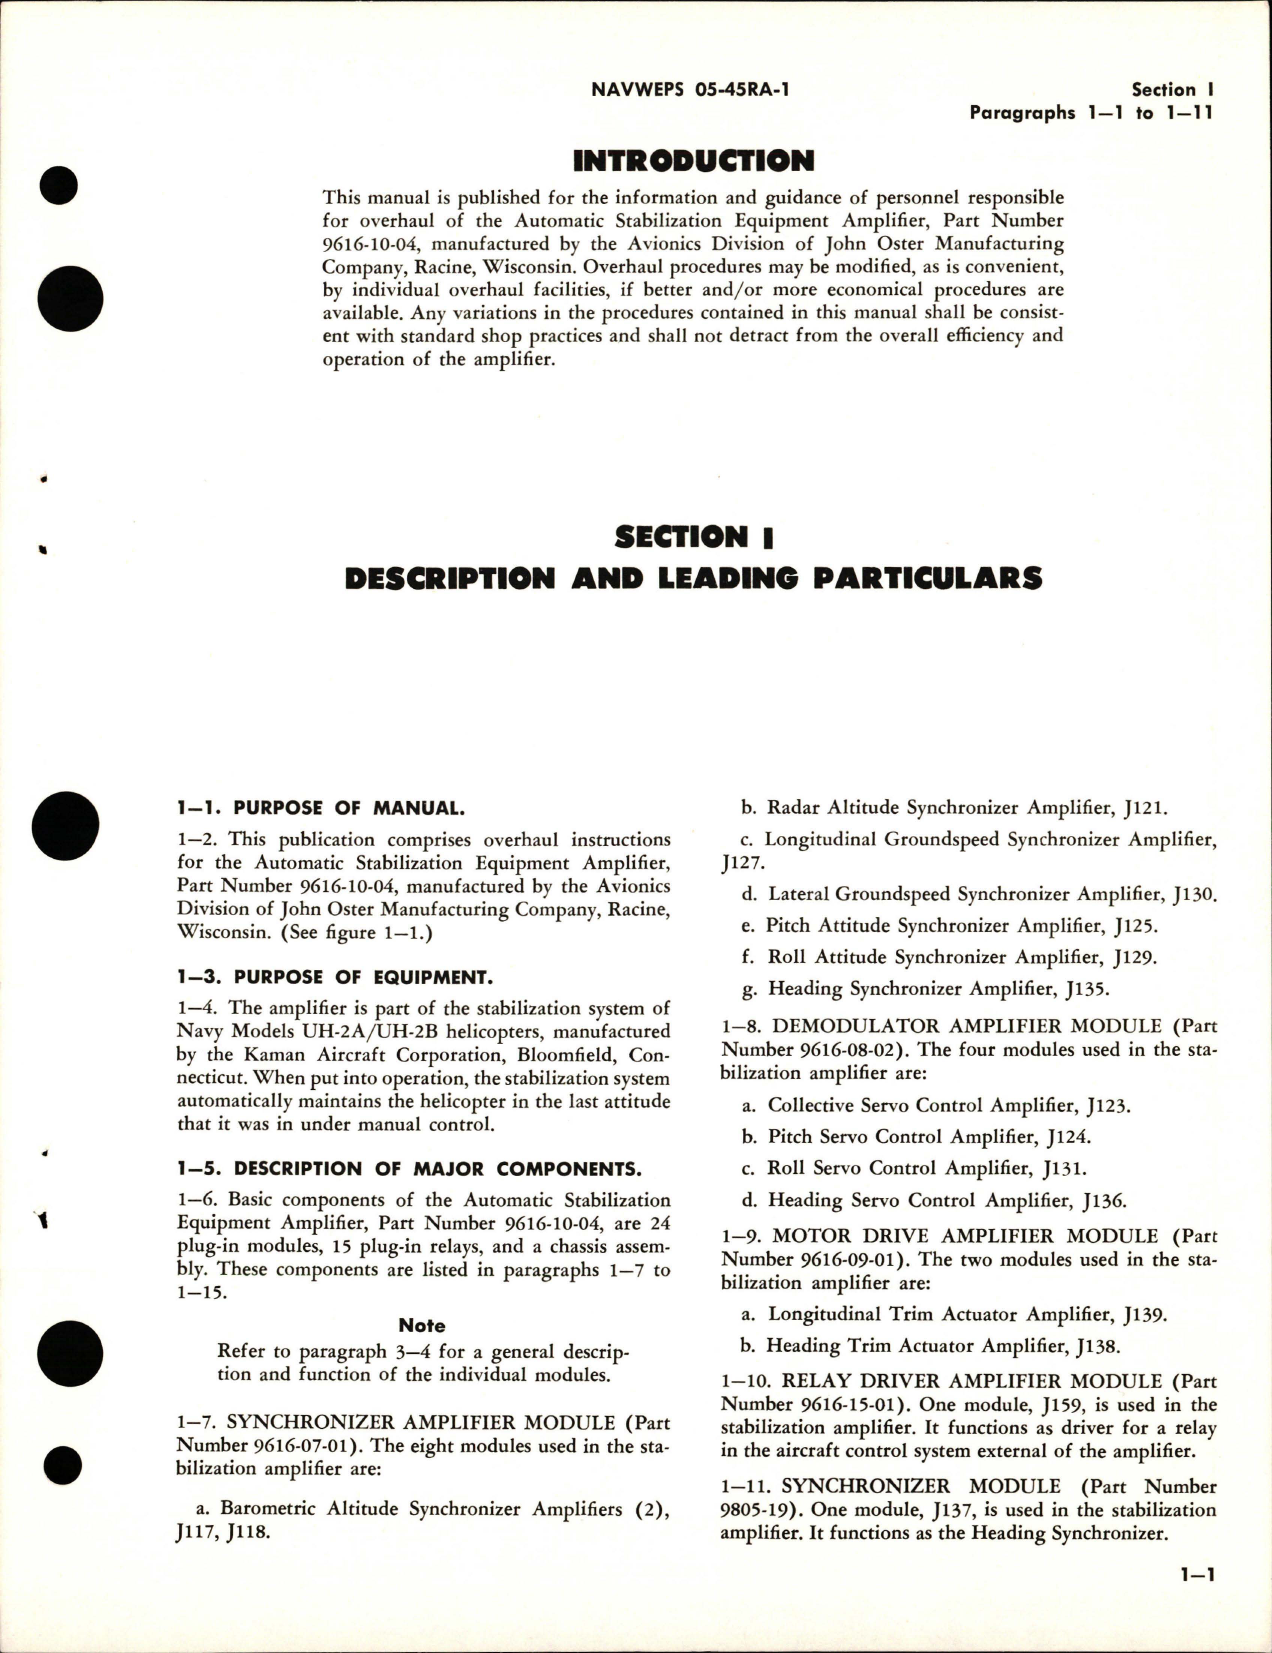 Sample page 7 from AirCorps Library document: Overhaul Instructions for Automatic Stabilization Equipment Amplifier - Part 9616-10-04